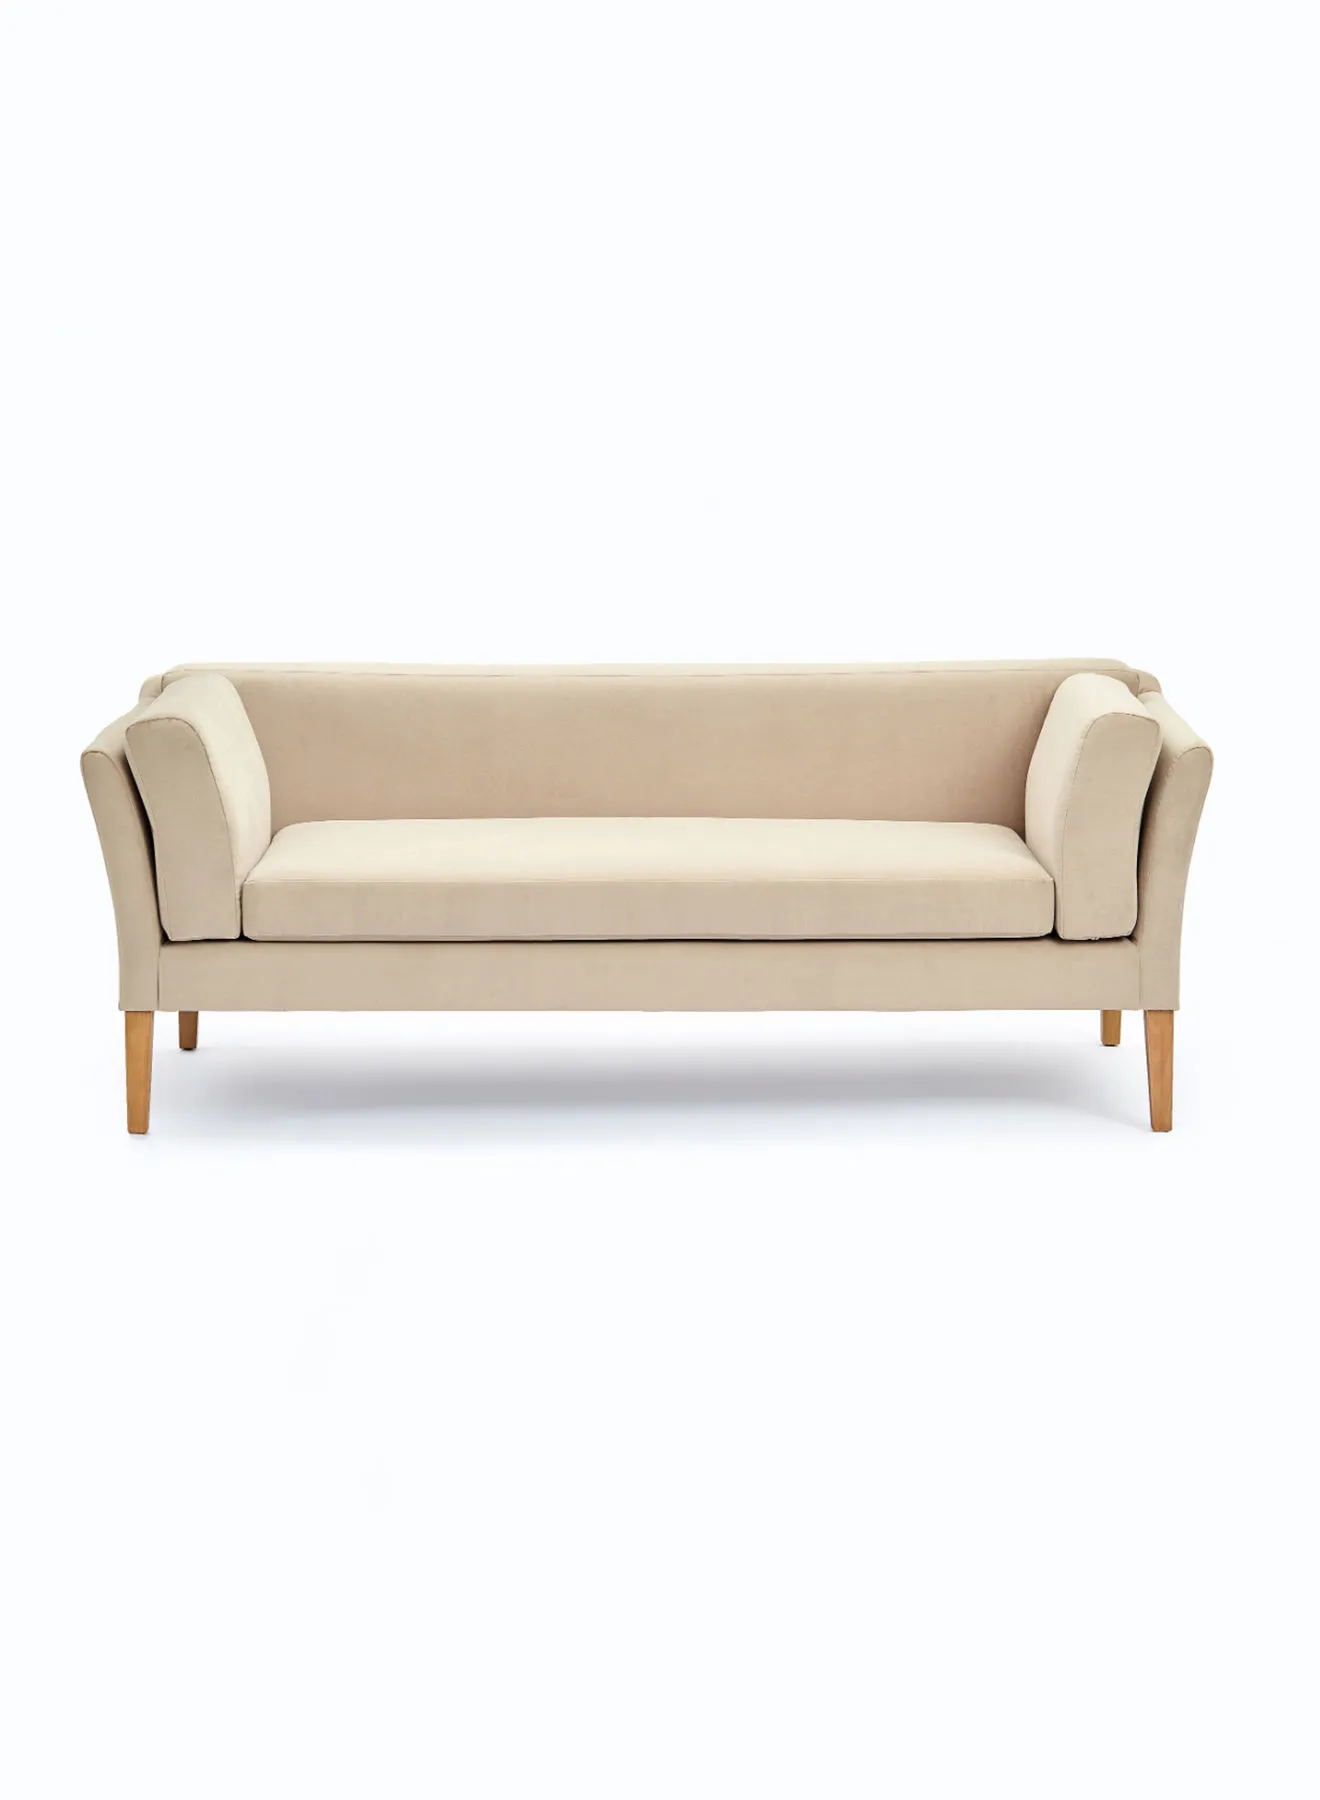 ebb & flow Sofa Luxurious - Upholstered Fabric Beige Wood Couch - 1830 X 840 X 690 - 3 Seater Sofa Relaxing Sofa